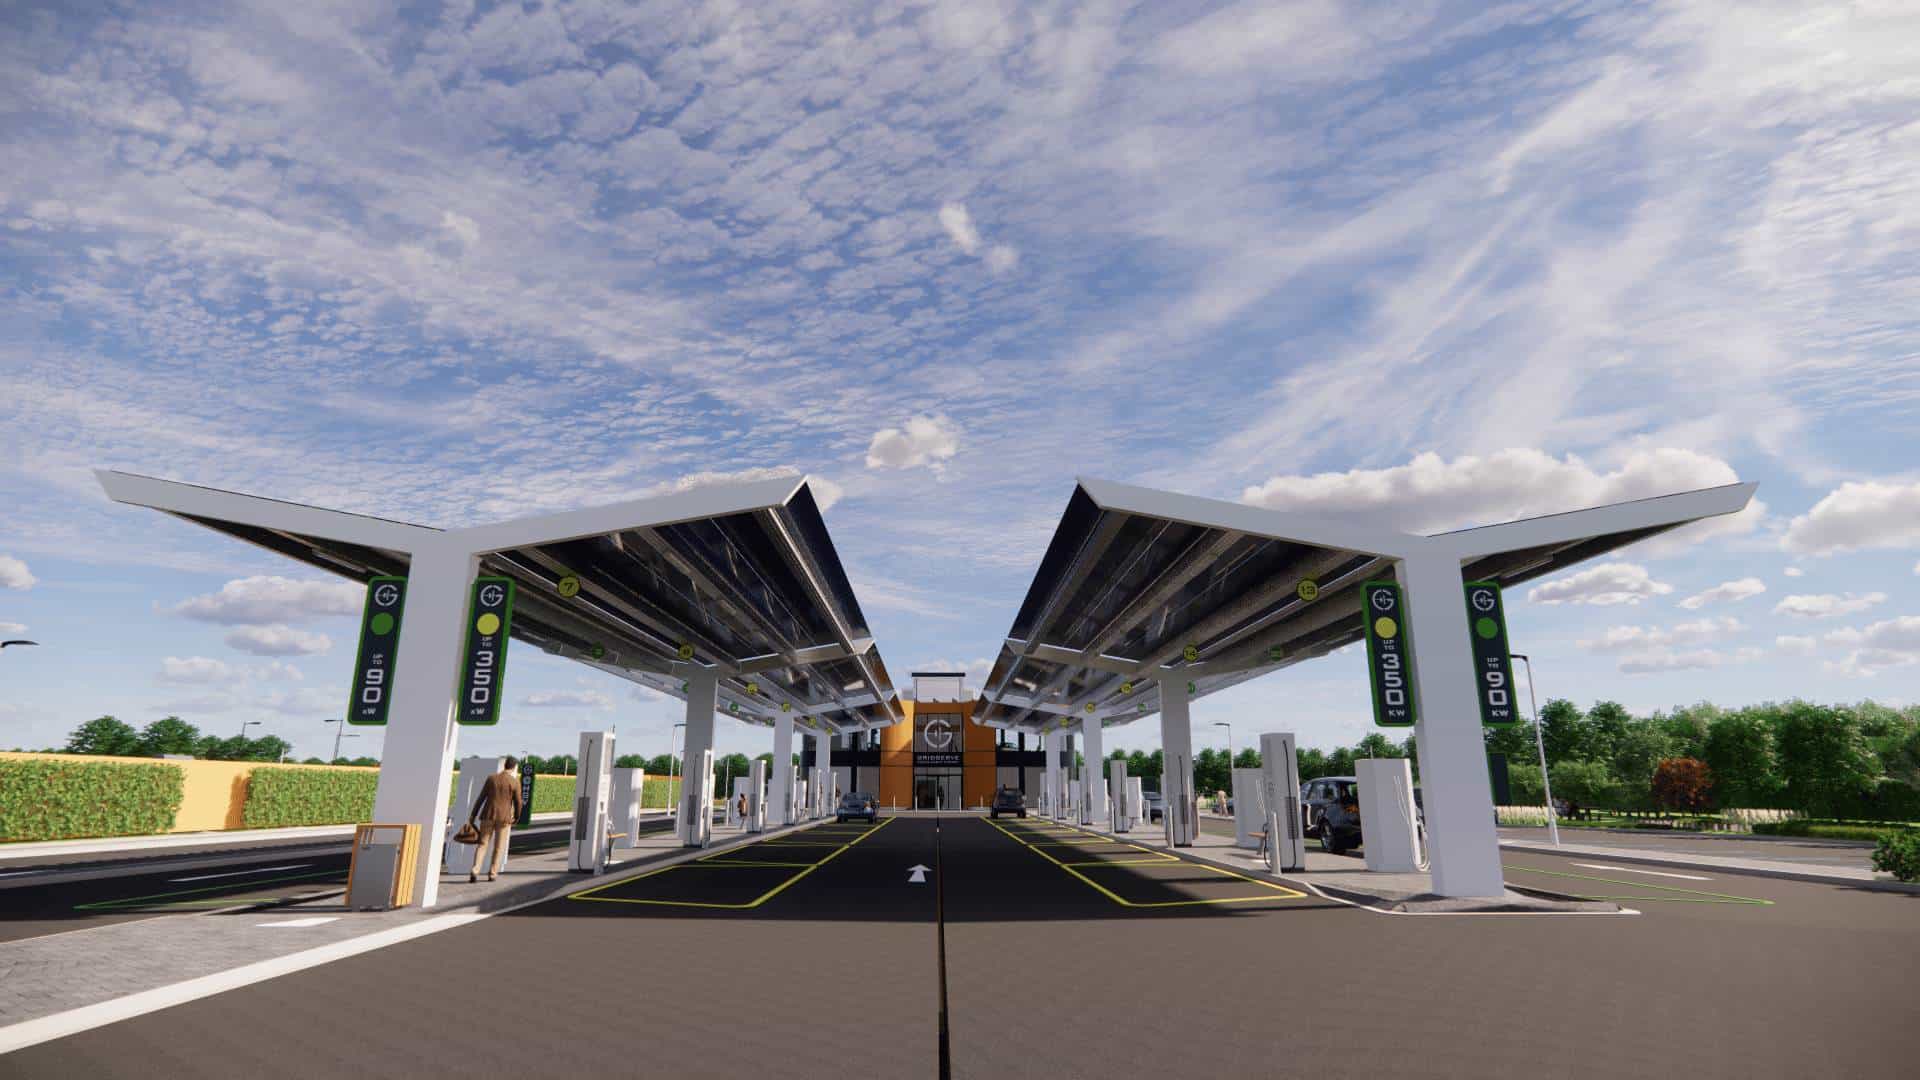 A CGI image of an electric forecourt for car charging